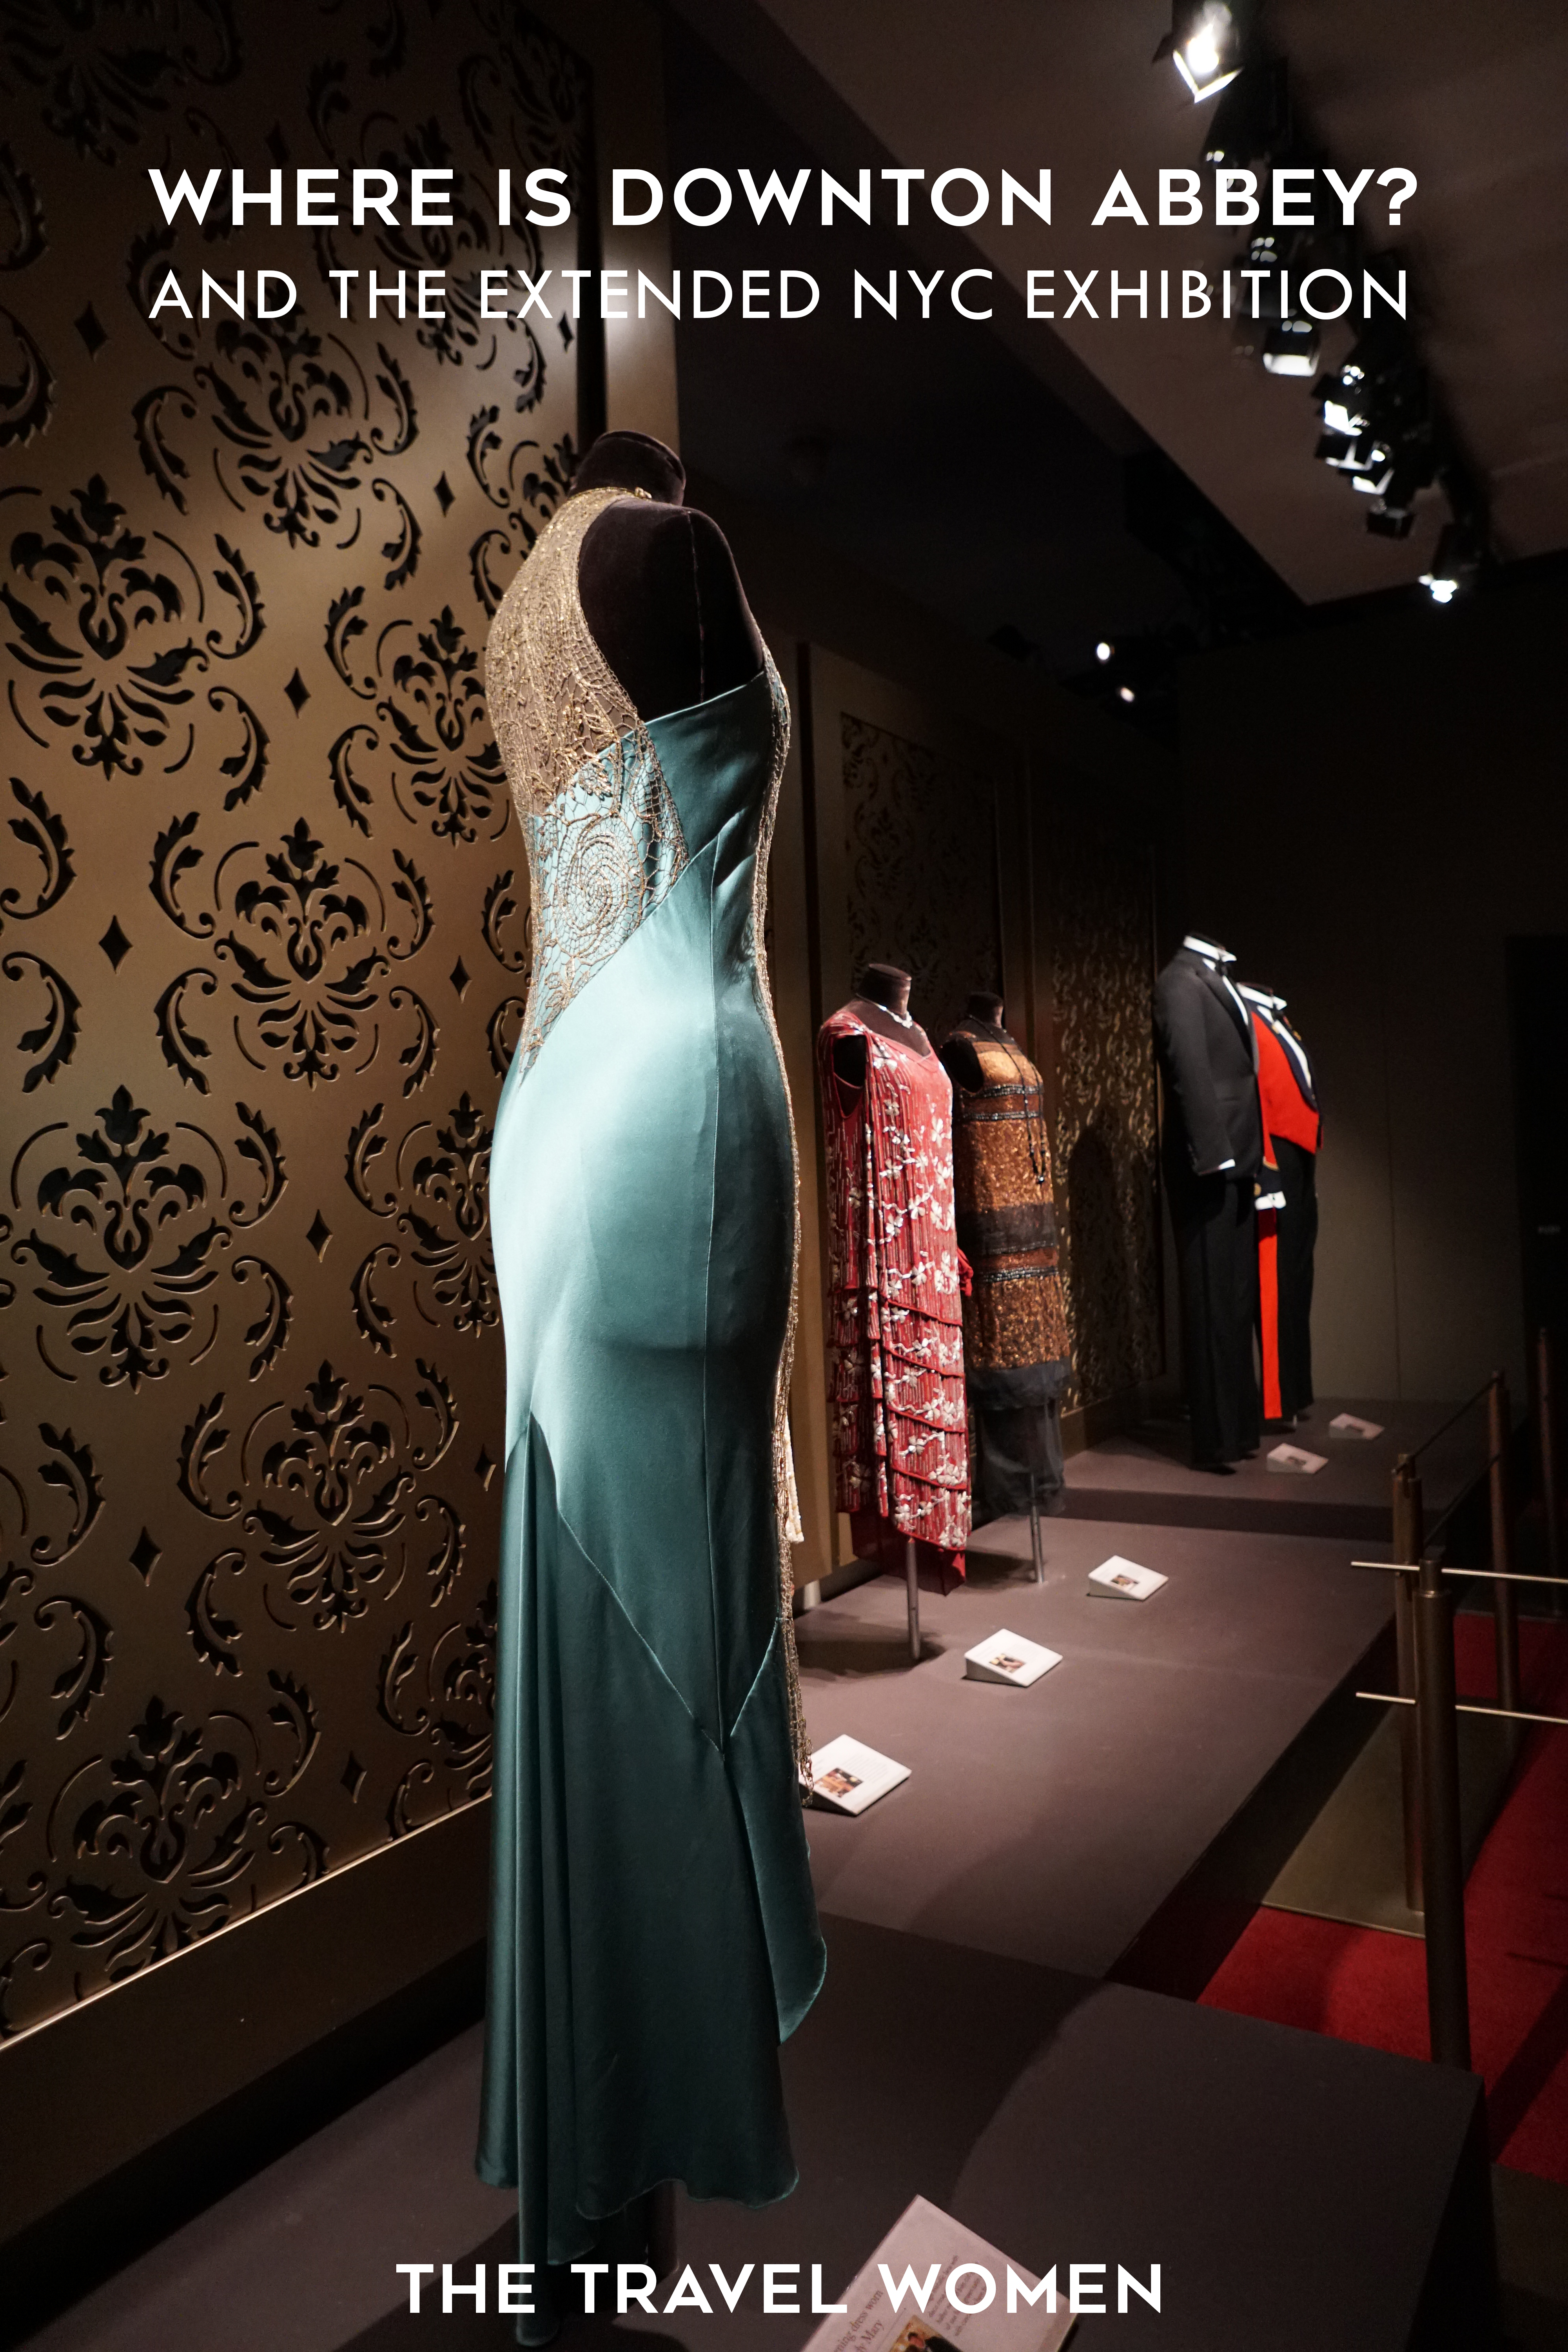 Downton Abbey Exhibition Extended